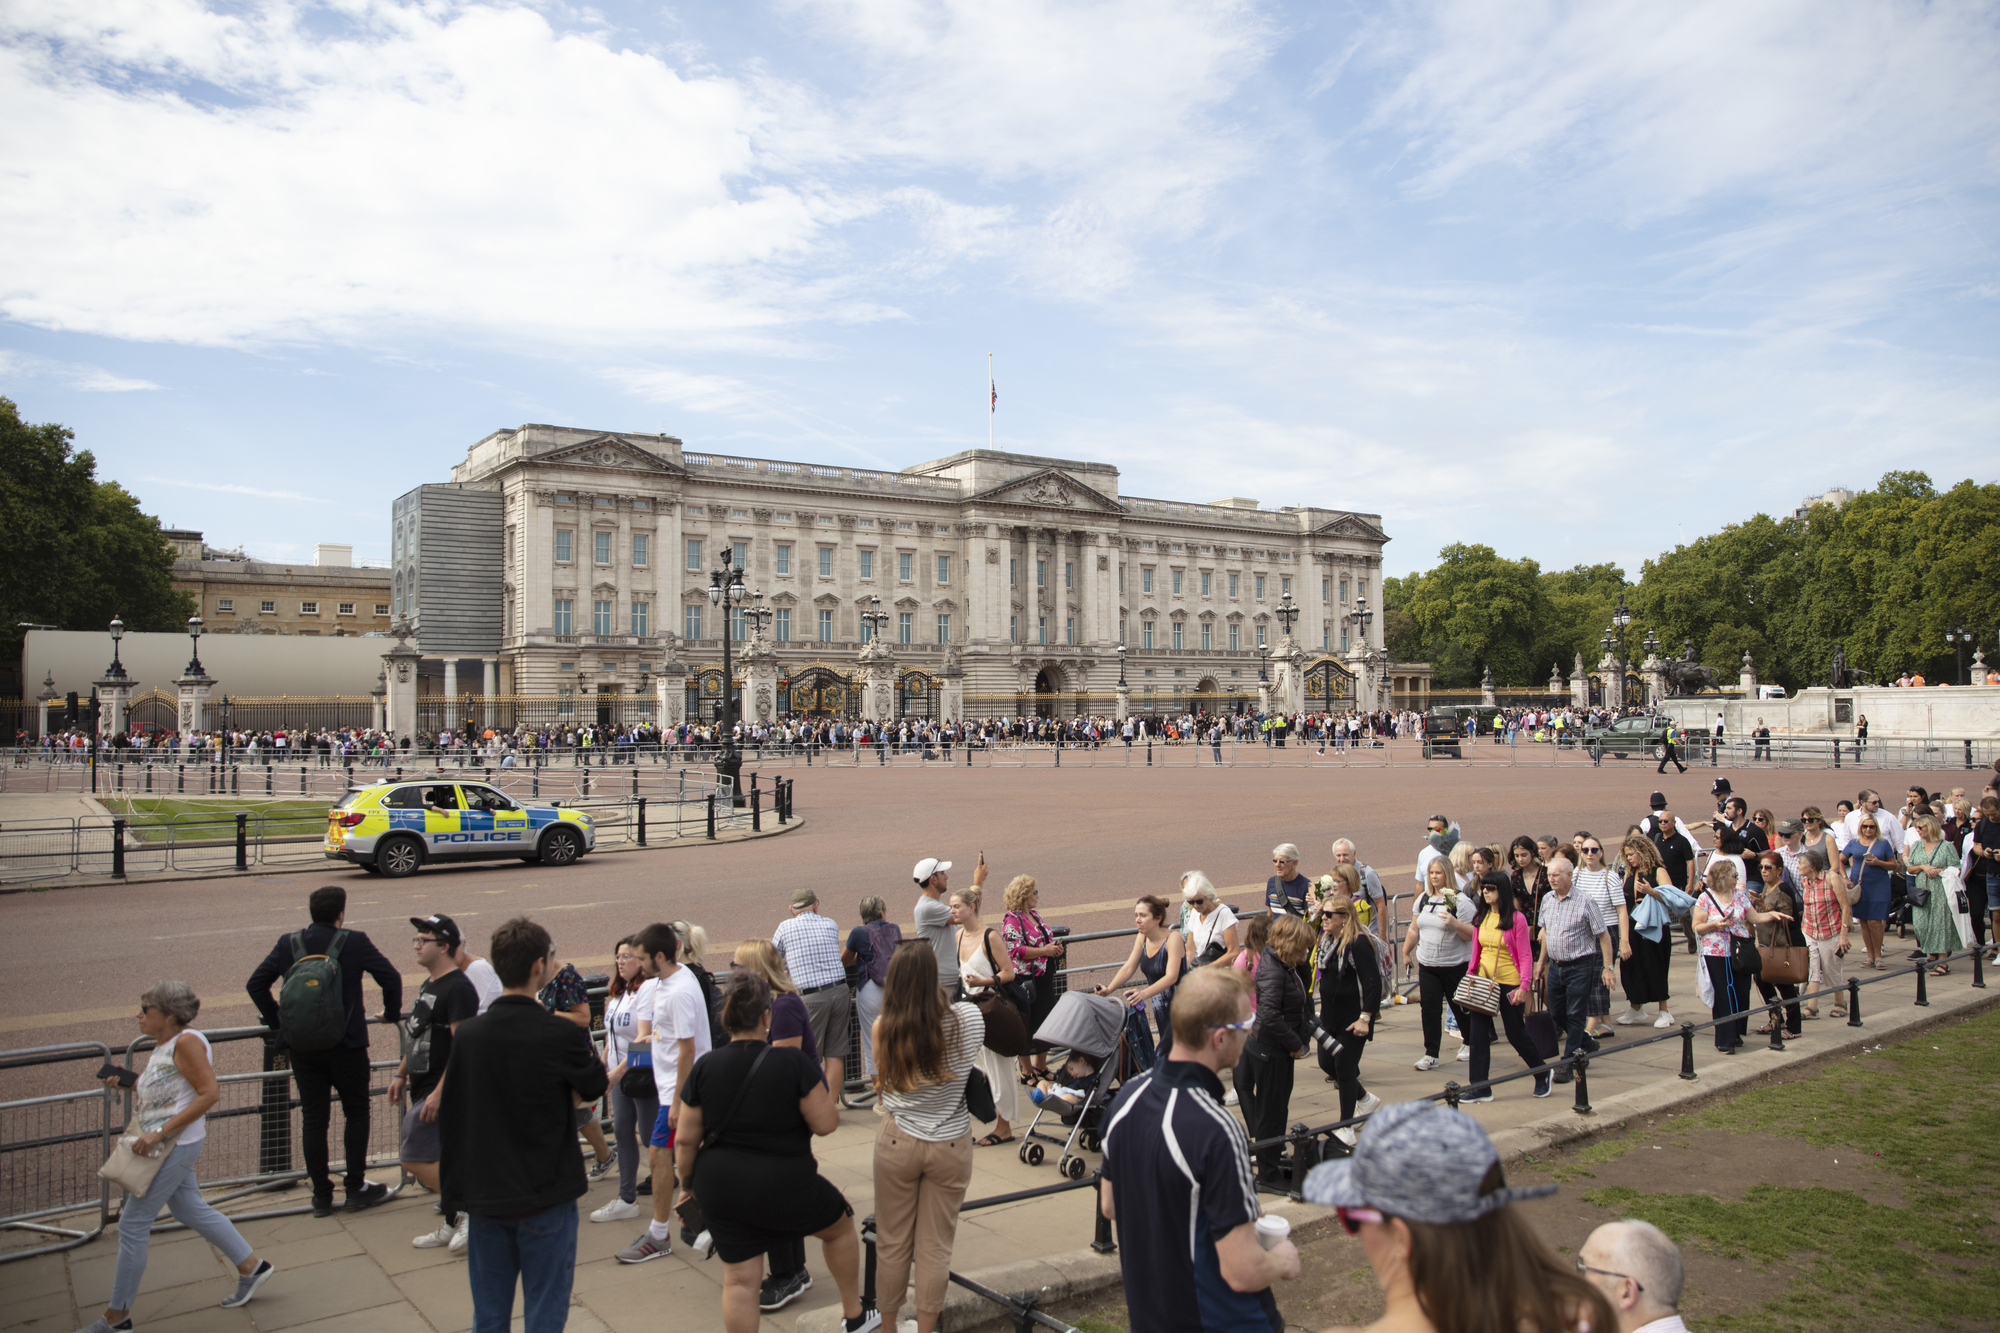 photograph of queue in front of Buckingham Palace